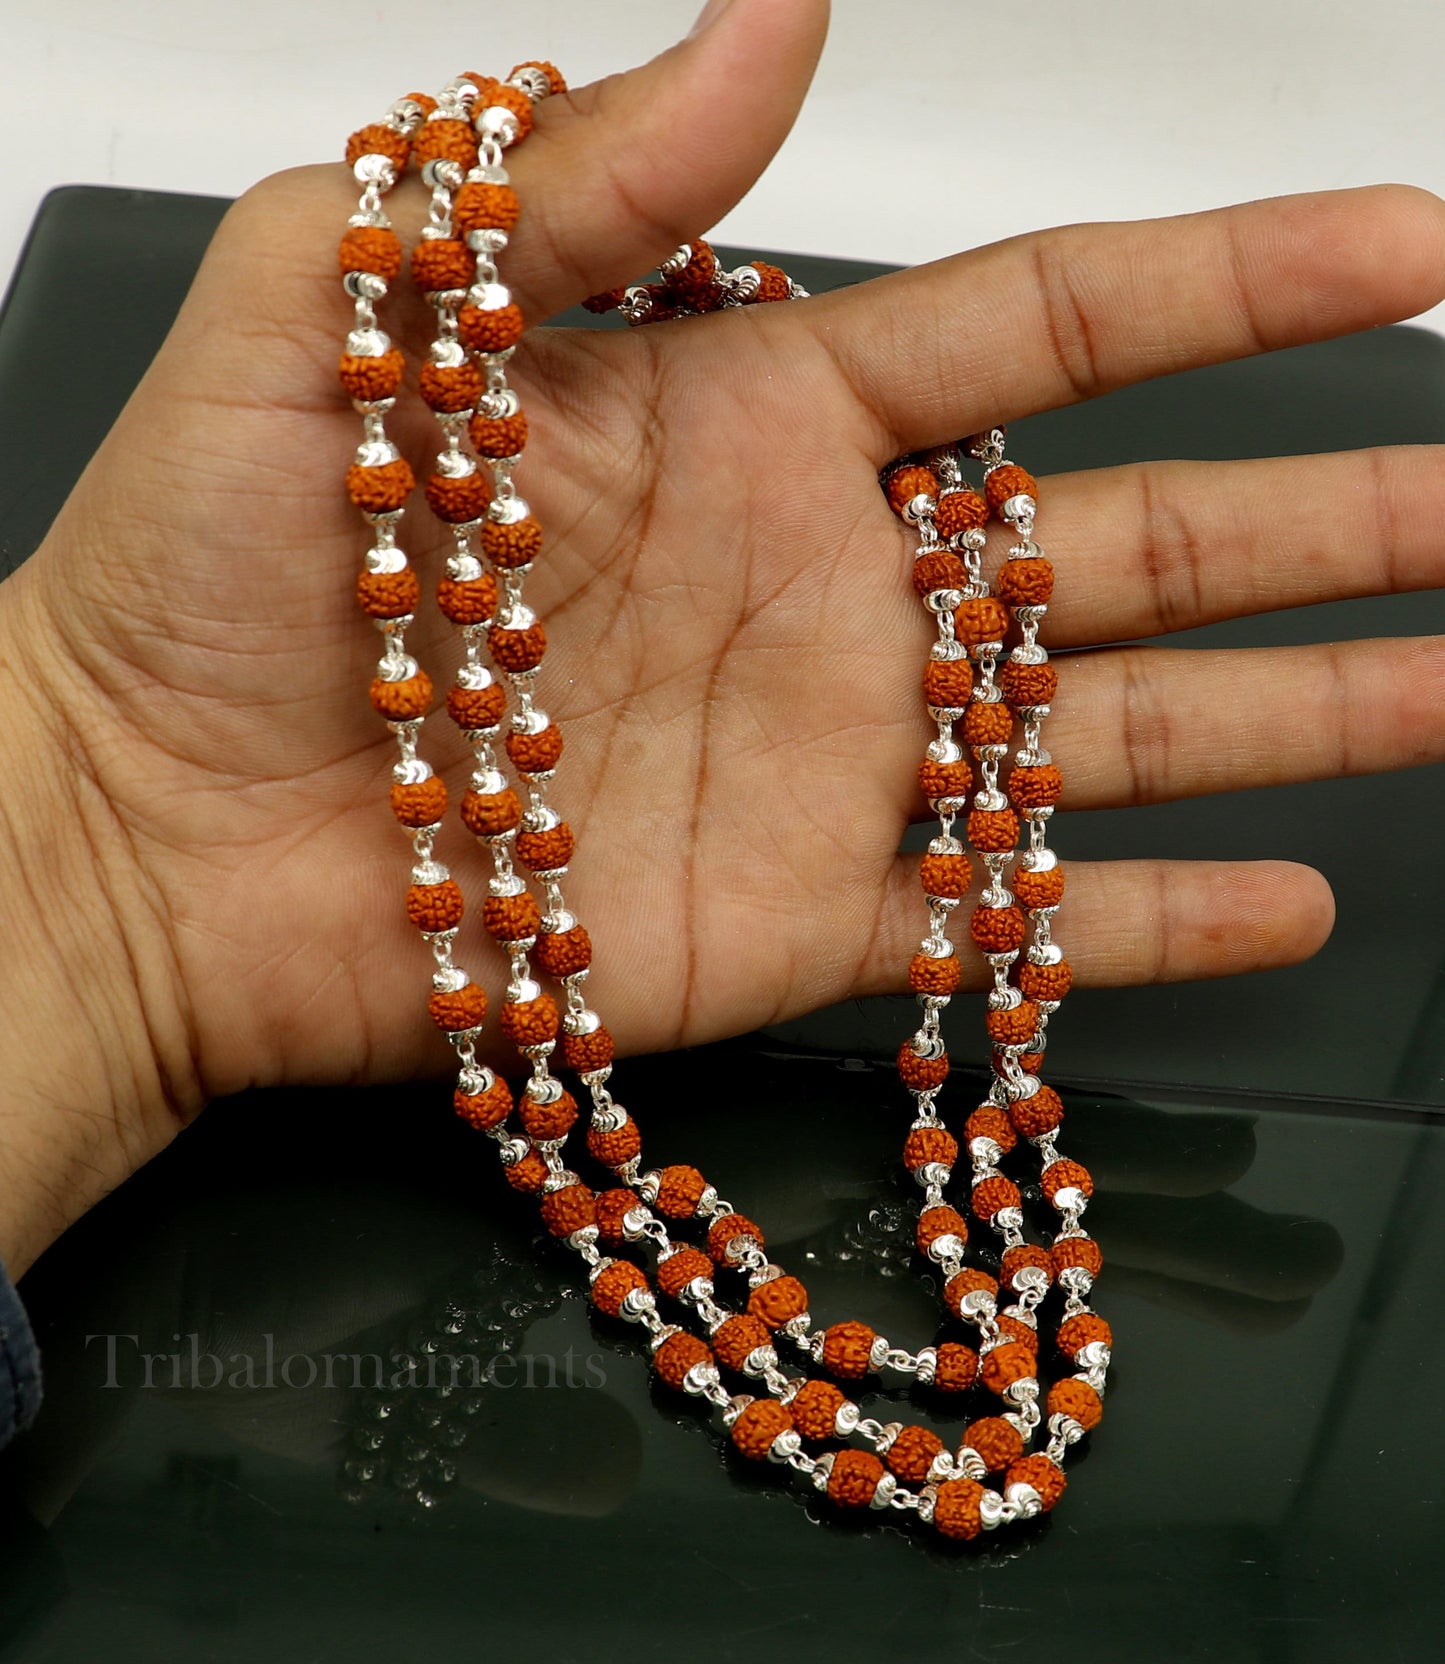 108 rudraksha japp mala Handmade Sterling silver gorgeous natural Rudraksh beads 54 inches necklace chanting praying meditation chain  ch39 - TRIBAL ORNAMENTS